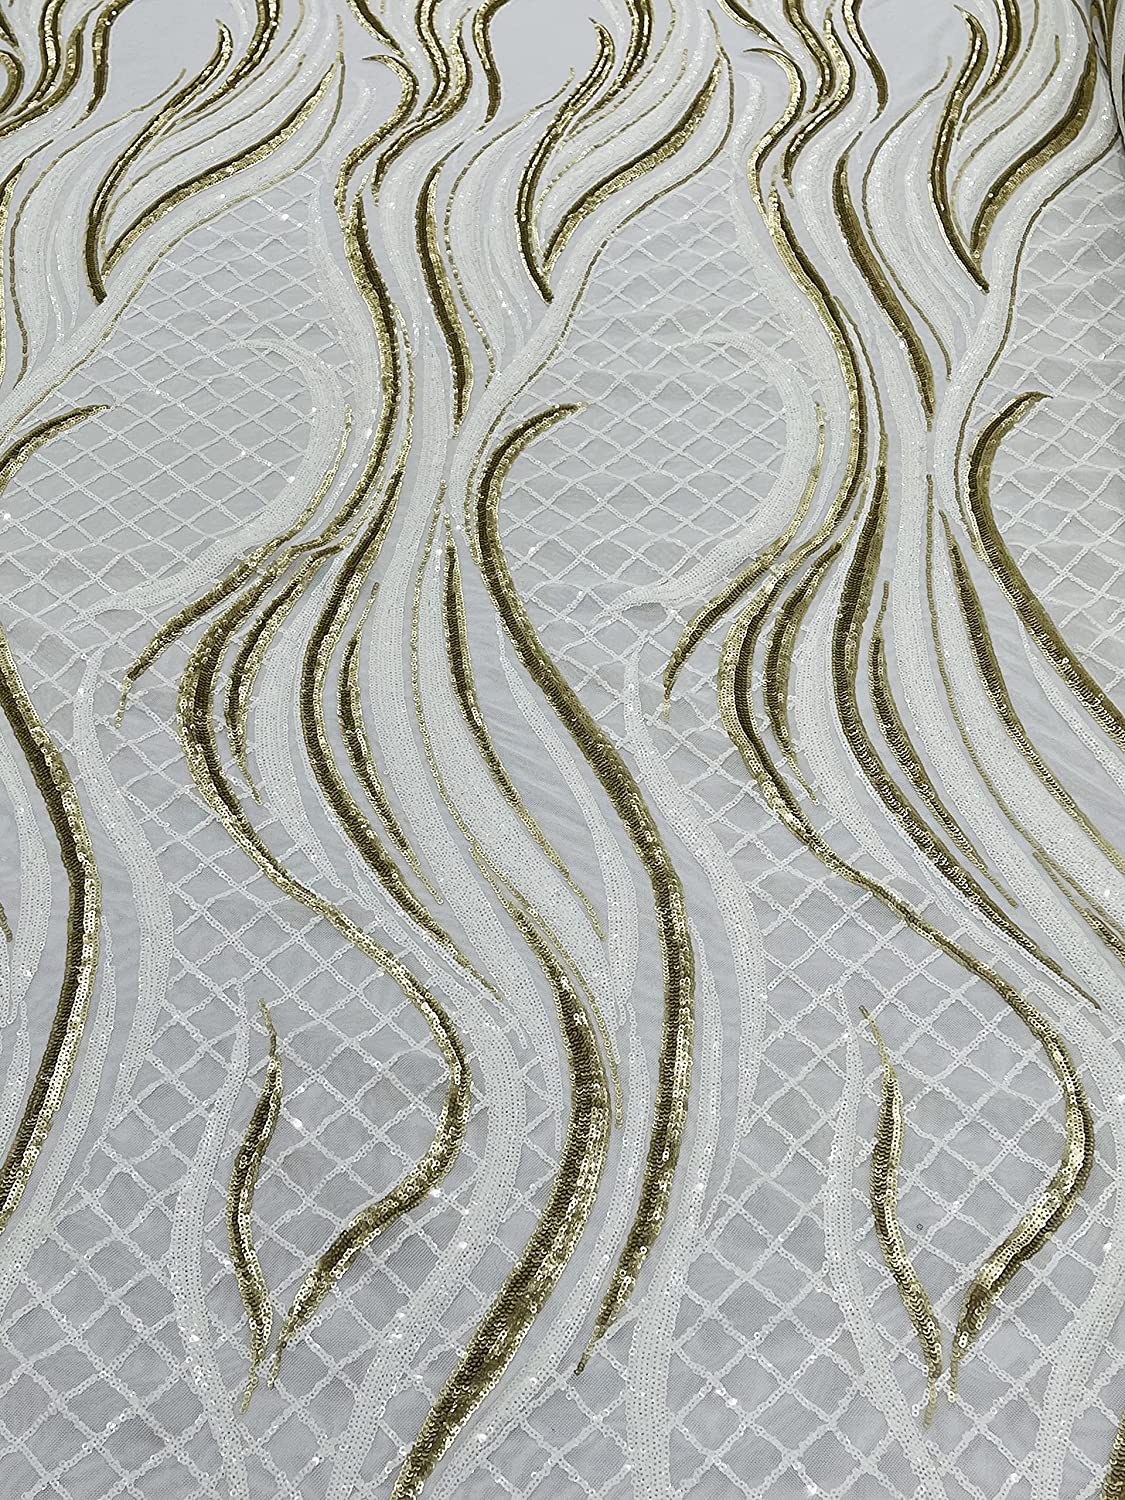 Sequin Flame Design On A 4 Way Stretch Mesh Fabric by The Yard (1 Yard, White/Matte Gold)